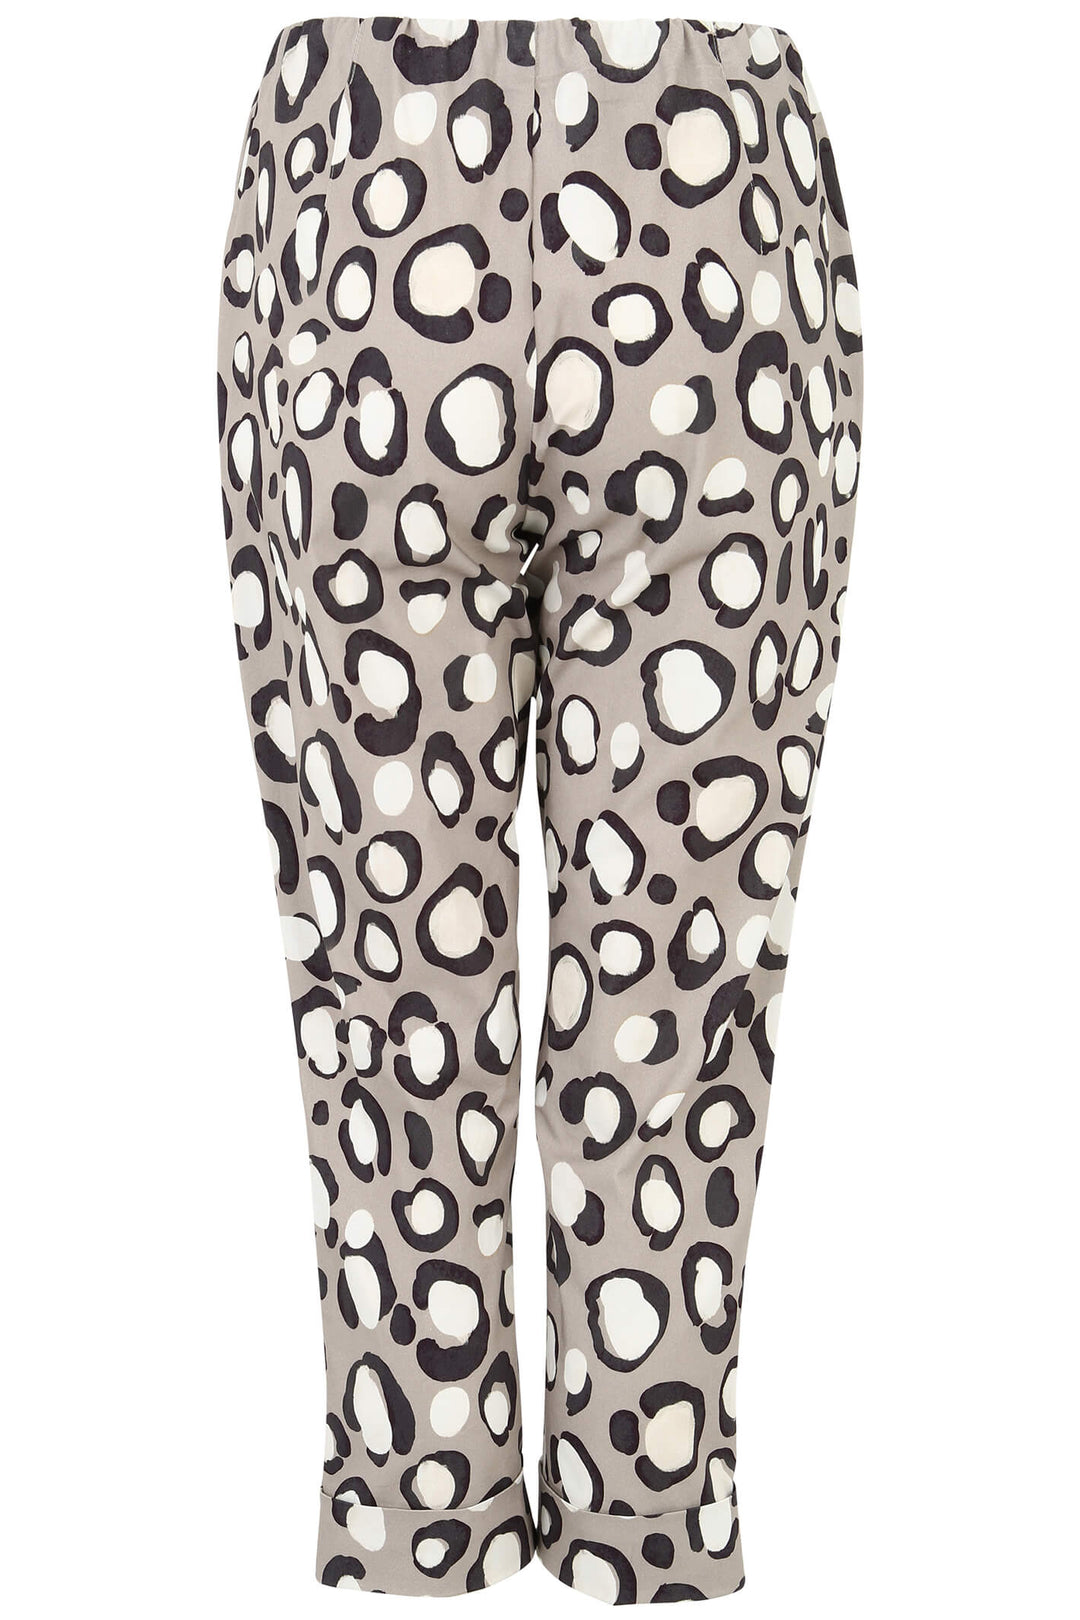 Doris Streich 818 413 Taupe Print Pull-On Trousers - Shirley Allum Boutique